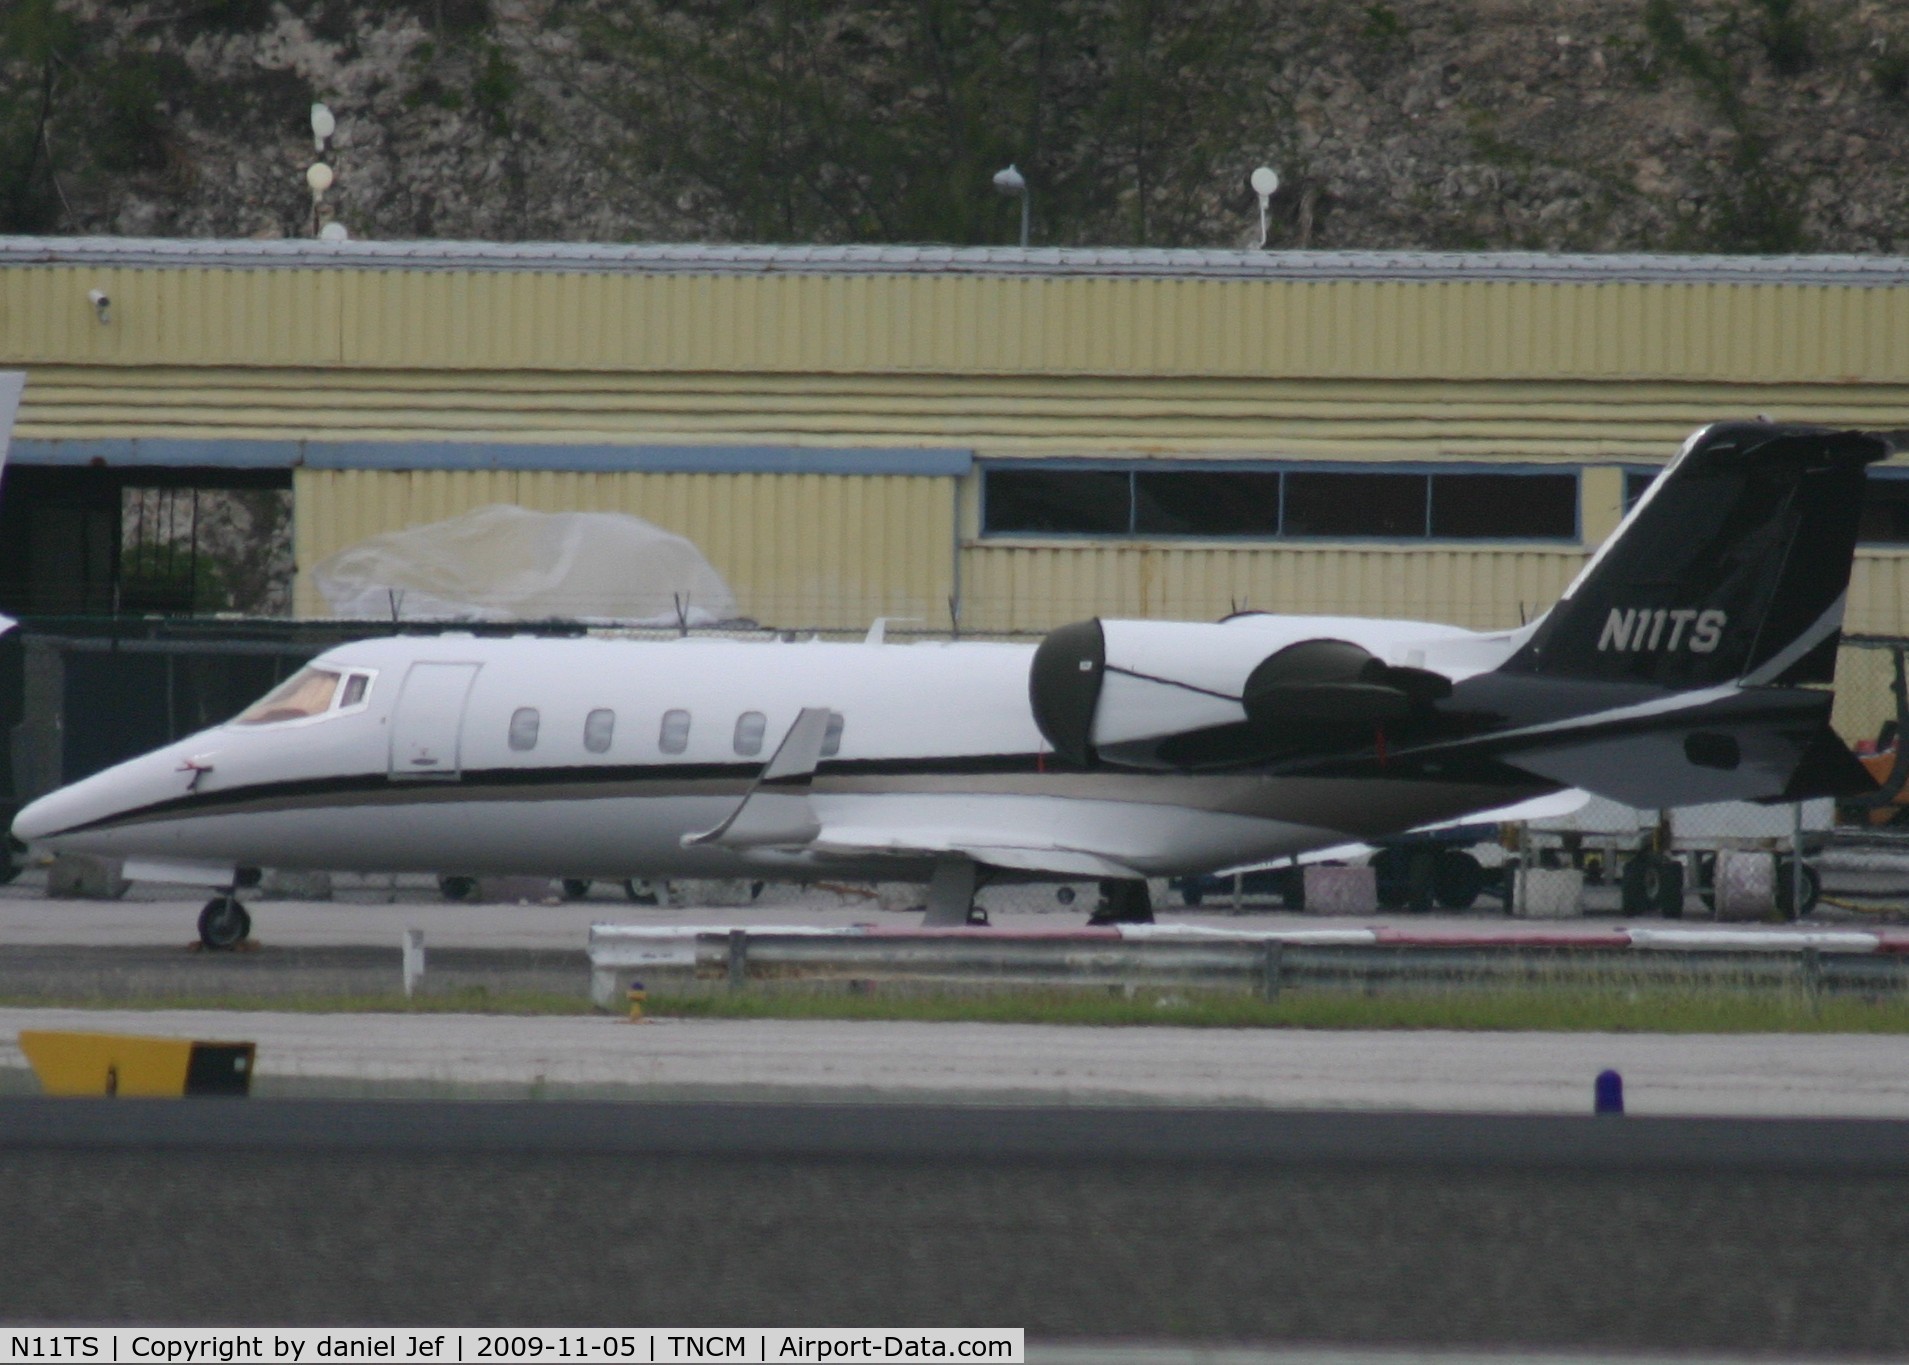 N11TS, 1999 Learjet 60 C/N 60-151, Park at the cargo ramp